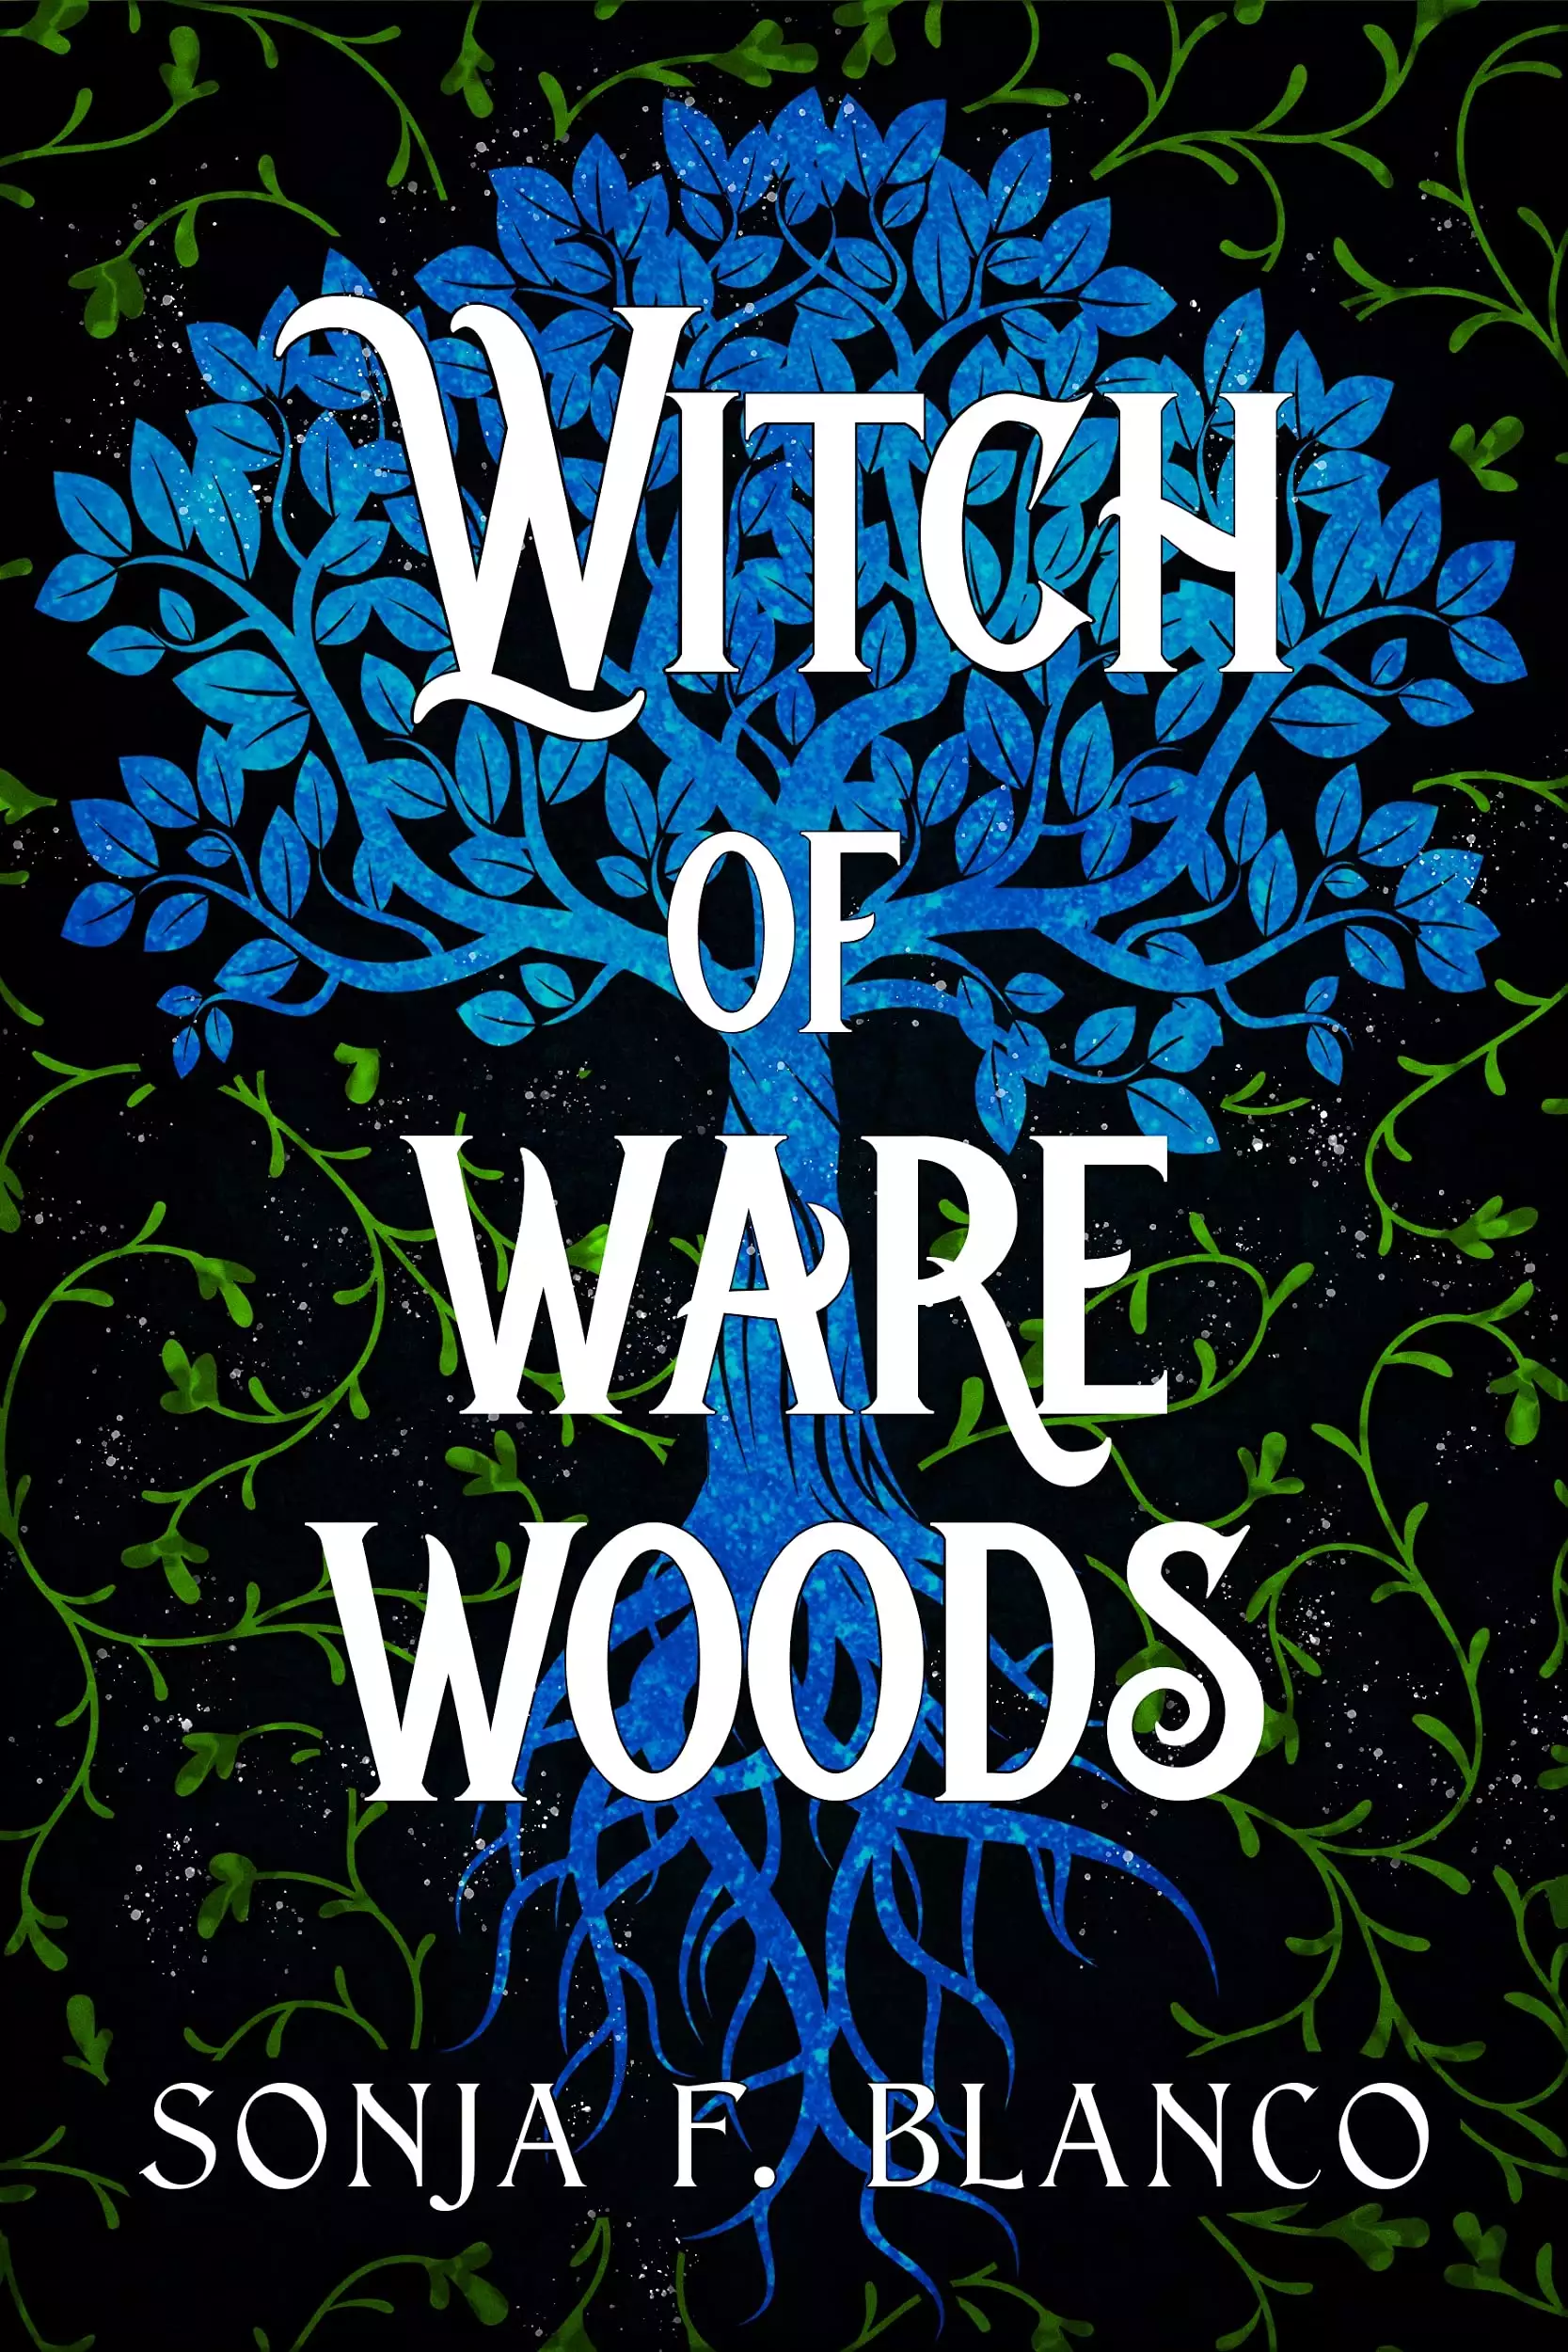 Witch of Ware Woods